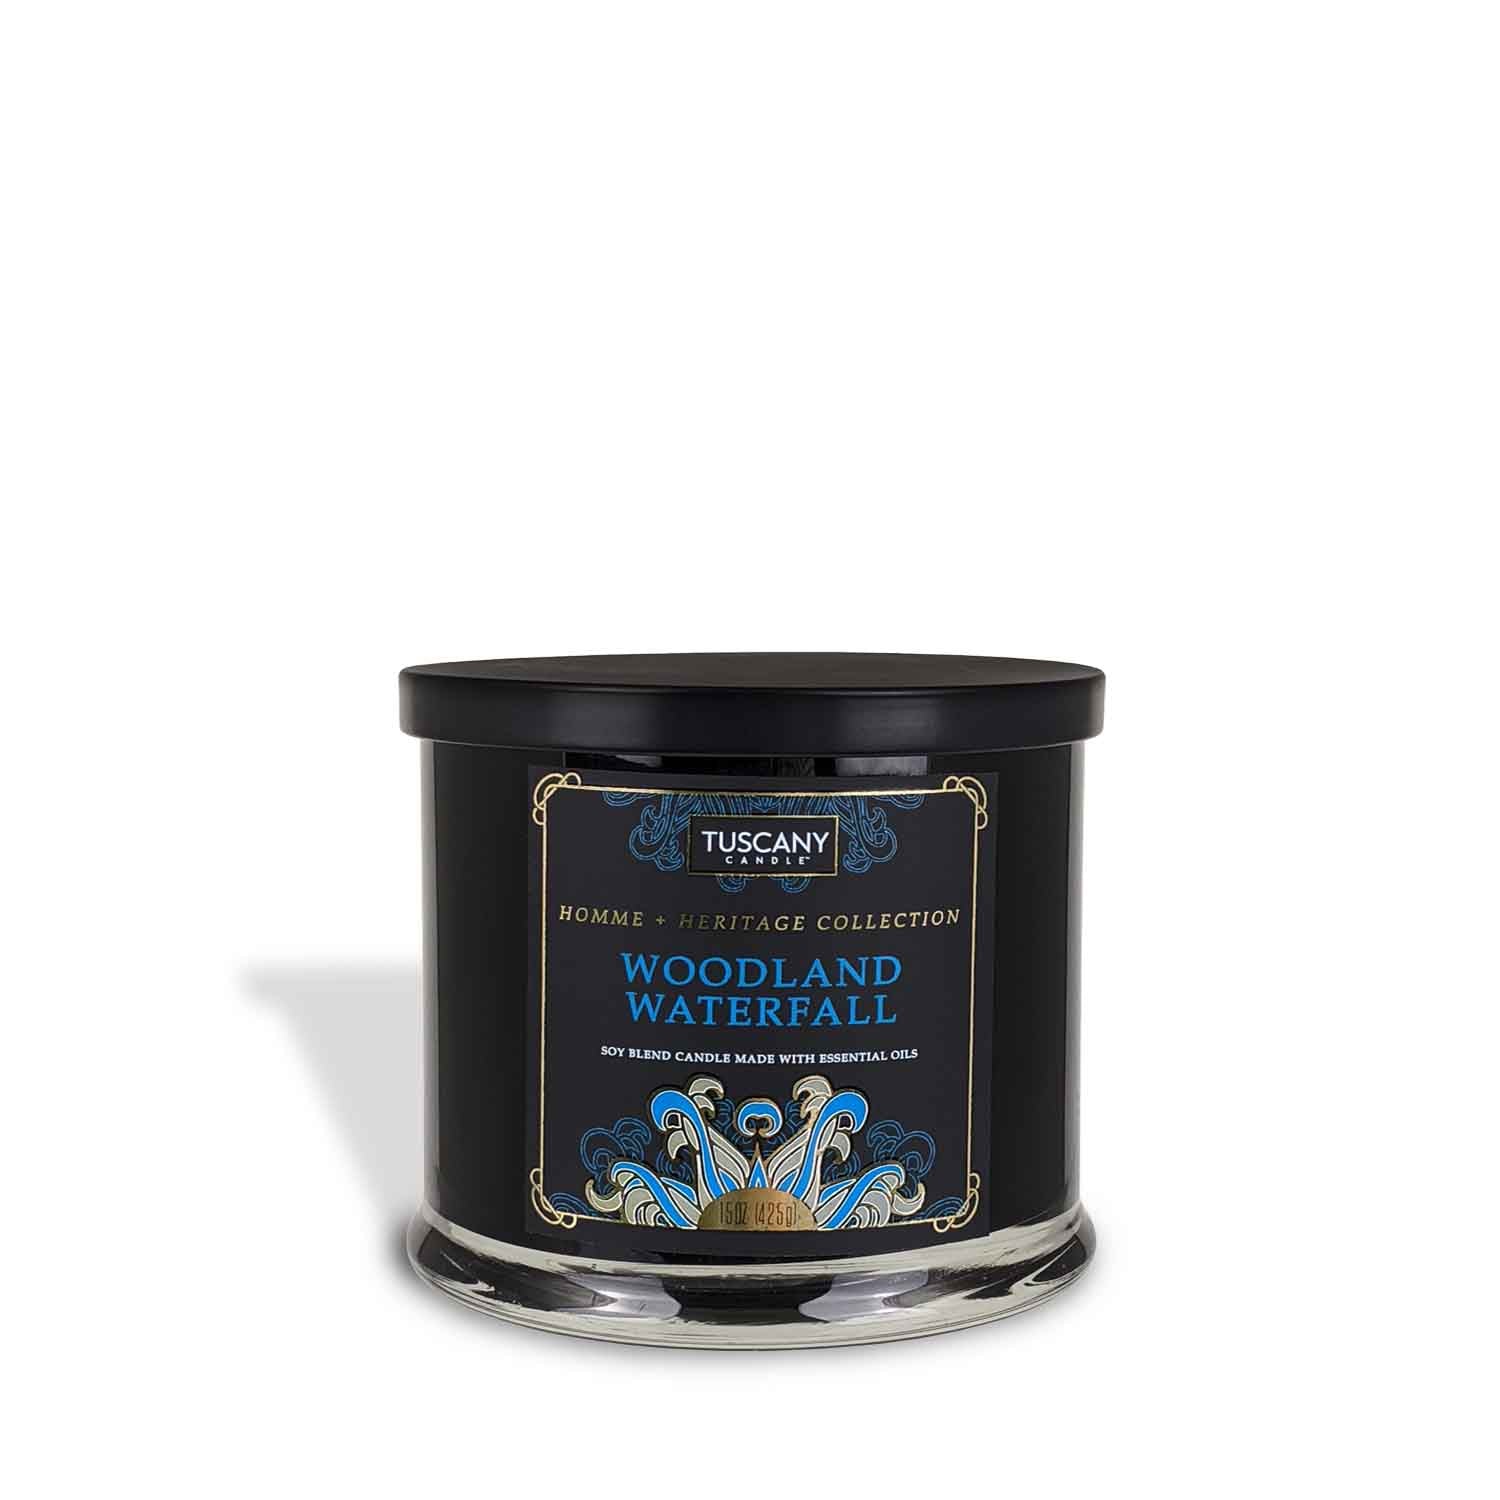 A Woodland Waterfall scented tin candle with a black lid, emanating a serene and fresh ocean air aroma from the Tuscany Candle Homme + Heritage Collection.